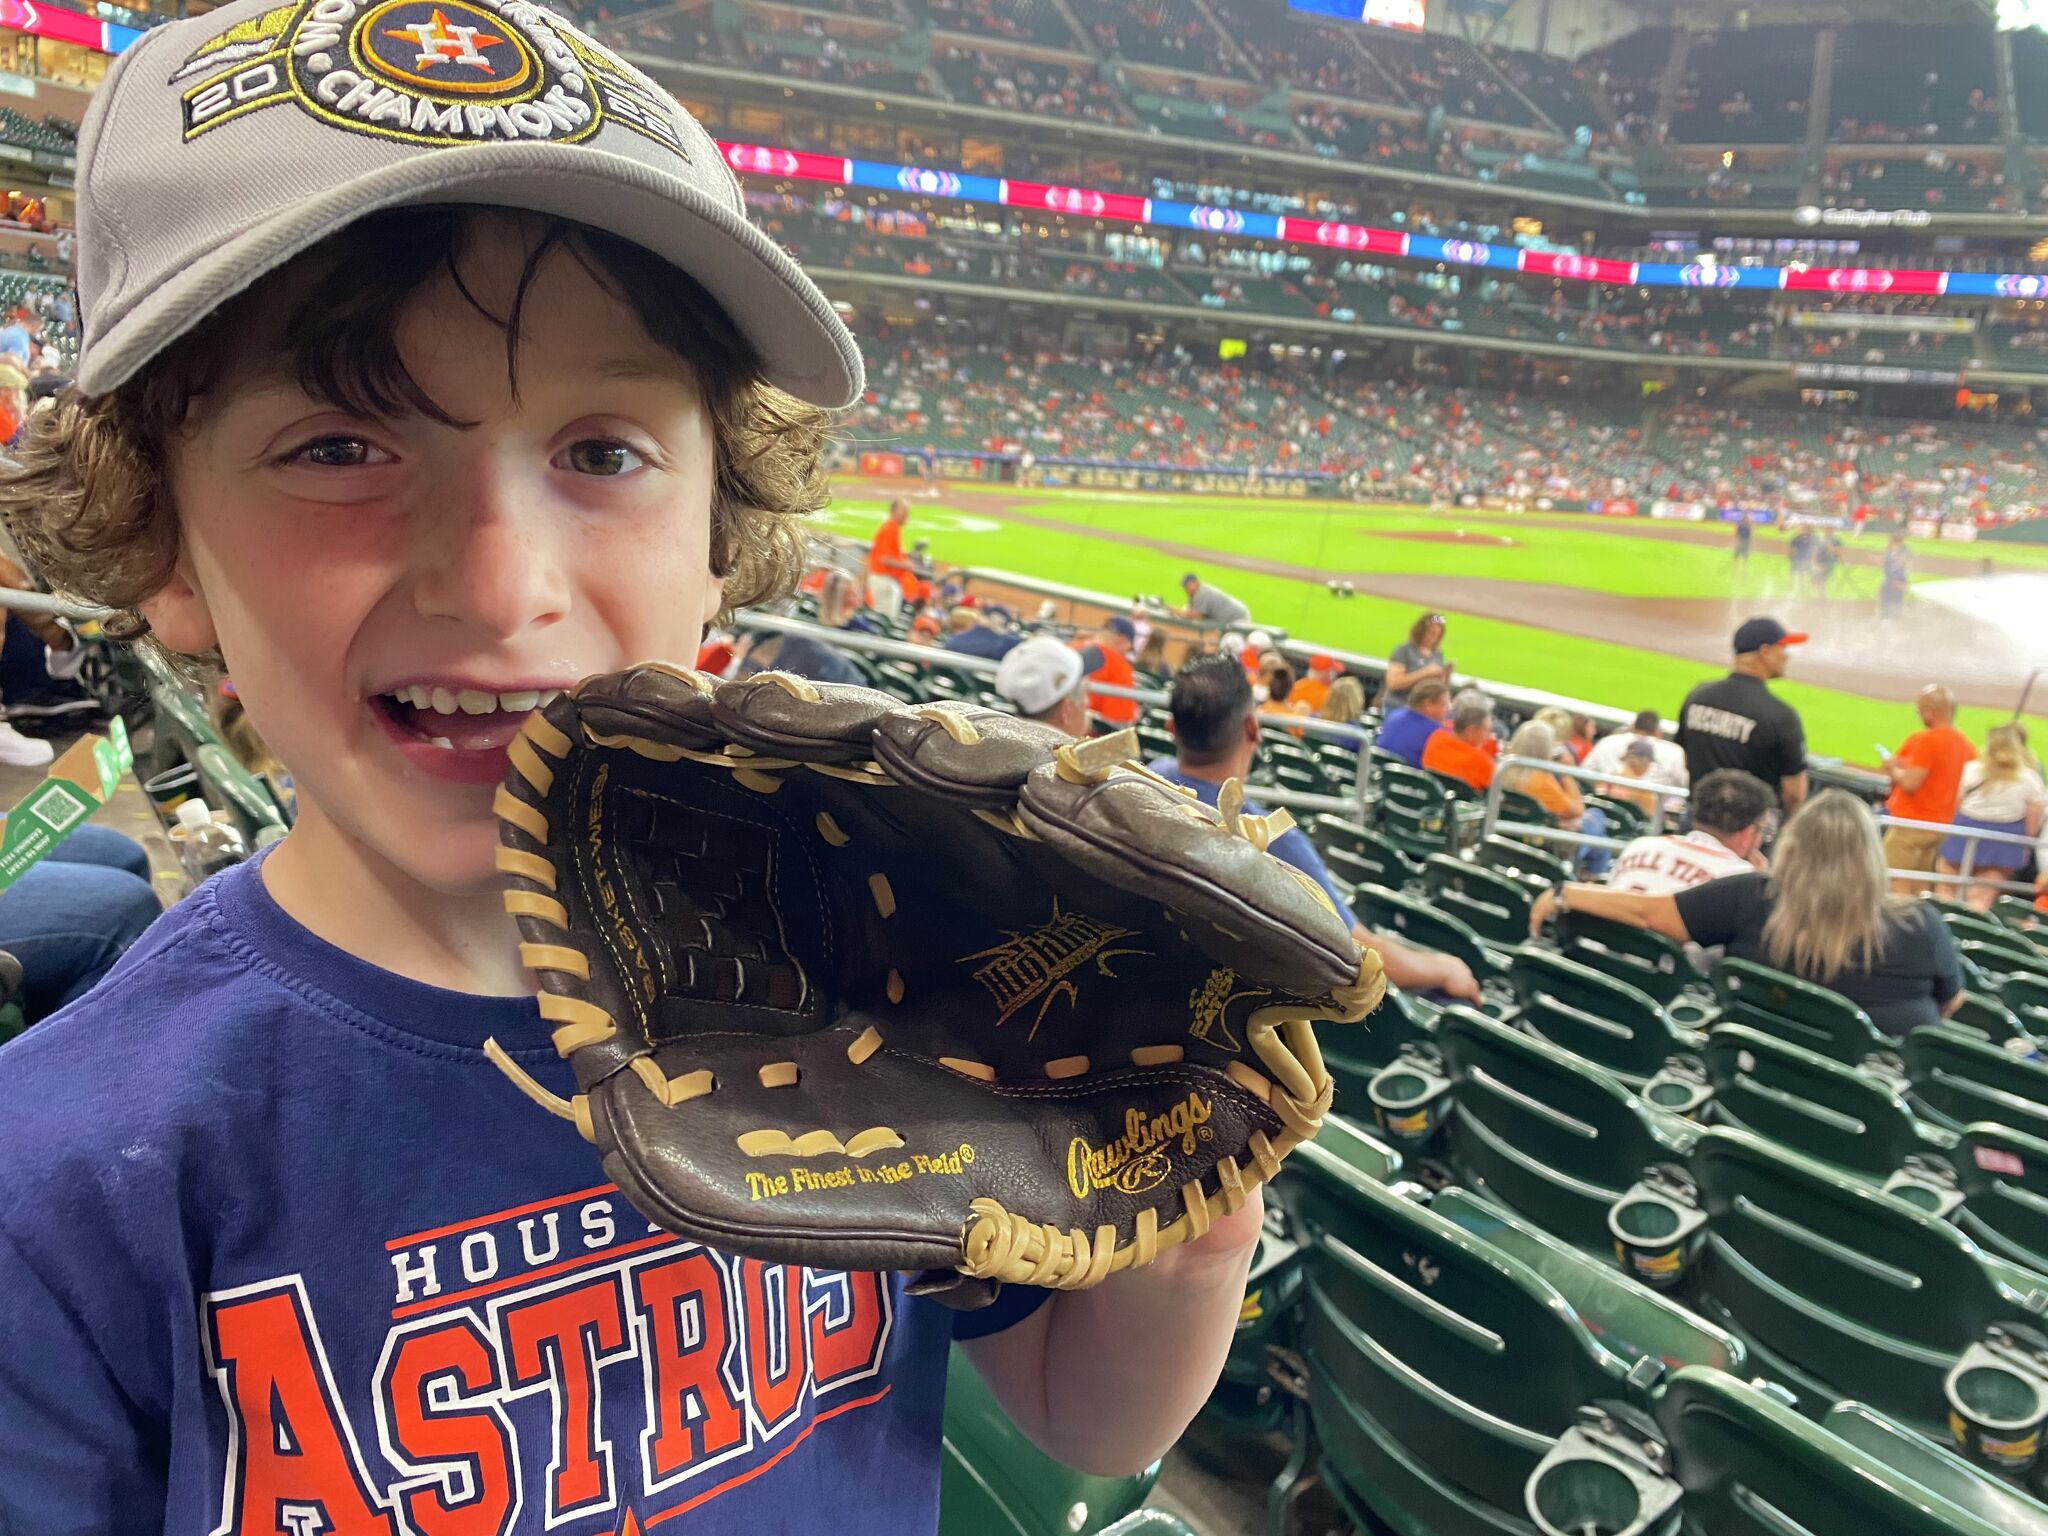 As my son fell in love with baseball, so did I.